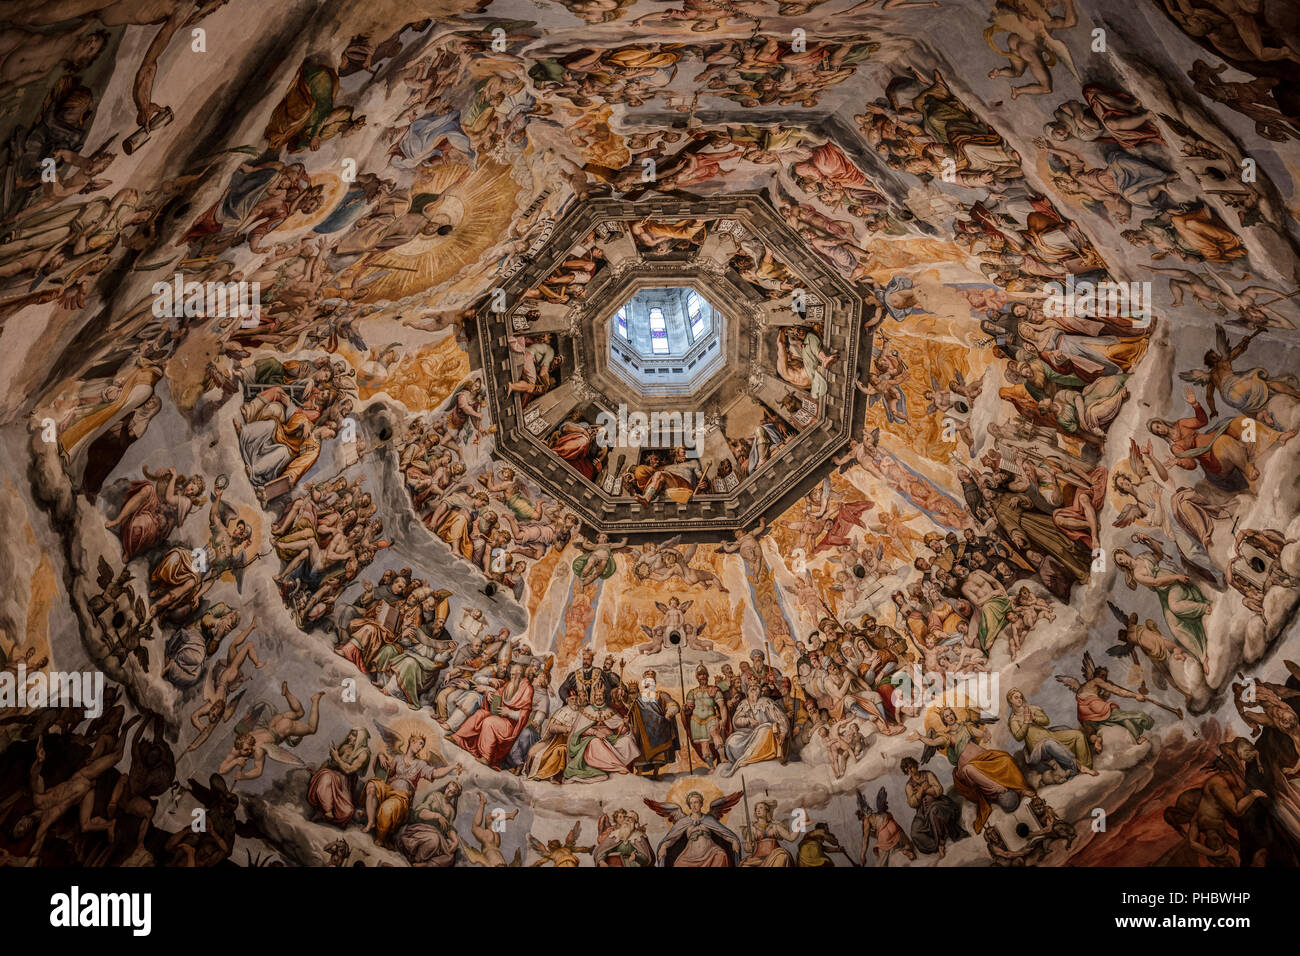 The interior of Brunelleschi's dome, the Duomo, Florence, UNESCO World Heritage Site, Tuscany, Italy, Europe Stock Photo